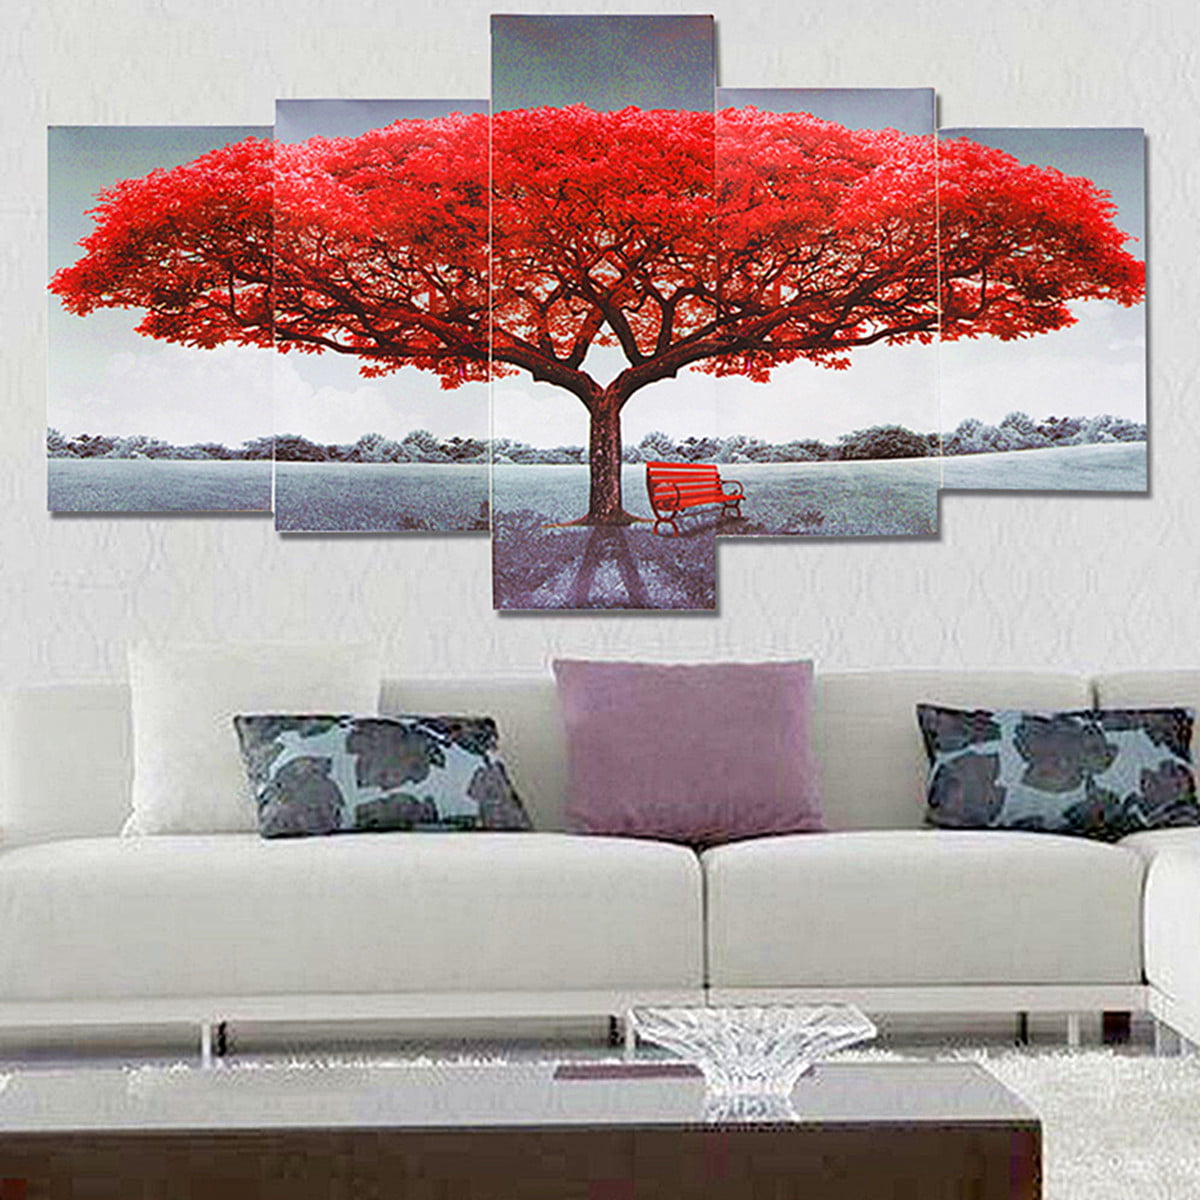 Unframed Modern Red Tree Oil Painting Art Wall Stickers Home Room Decoration